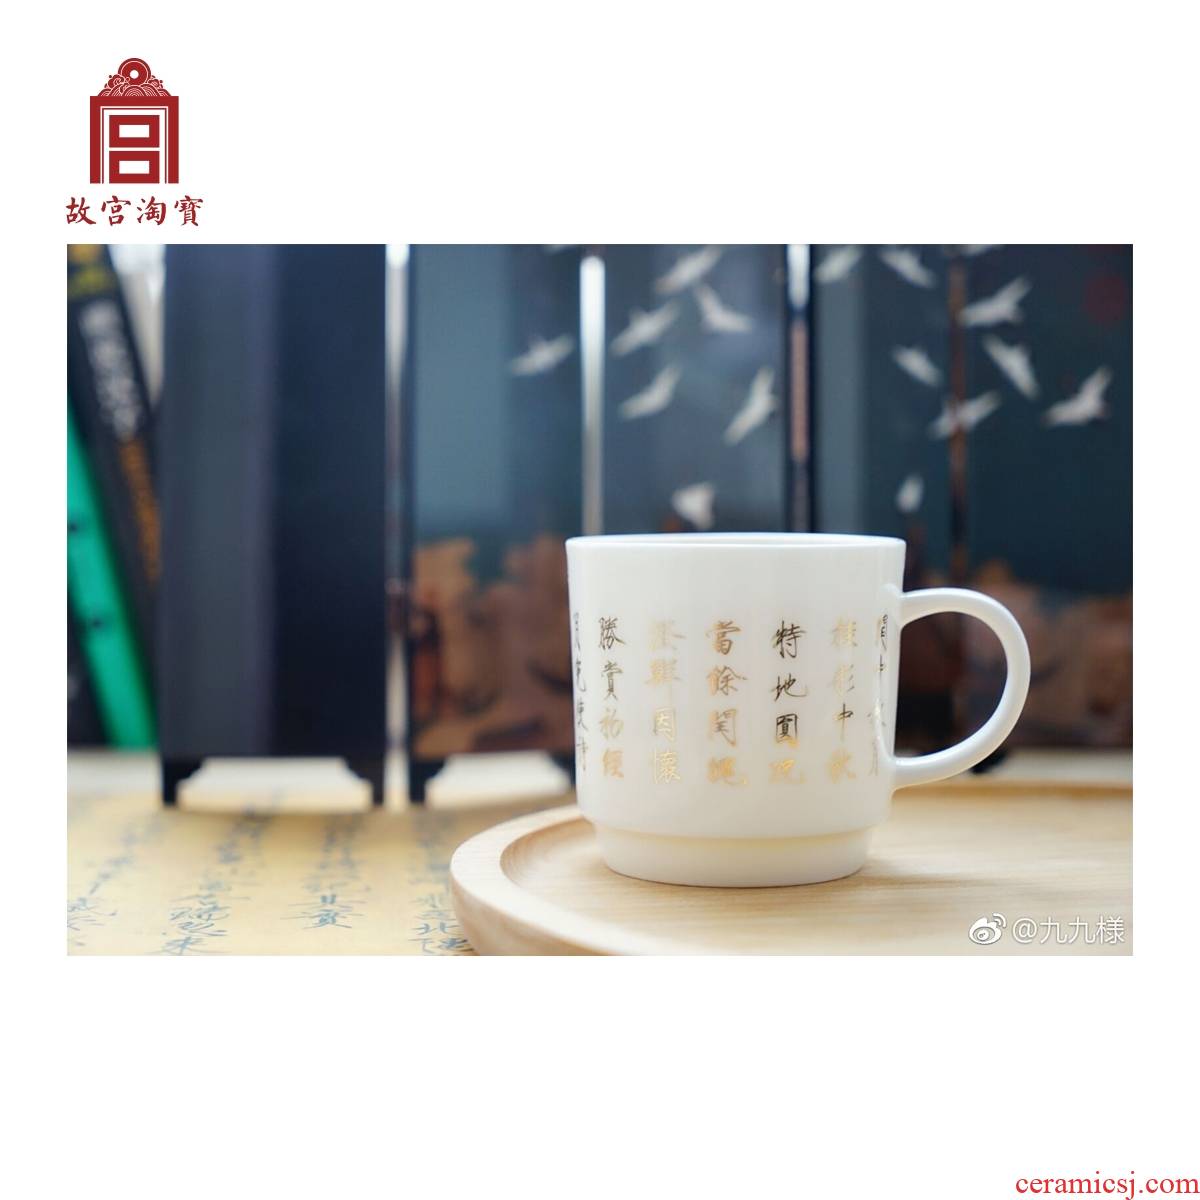 The Was the imperial palace taobao 】 【 the leap mid0autumn ShouJinTi calligraphy ipads porcelain cup